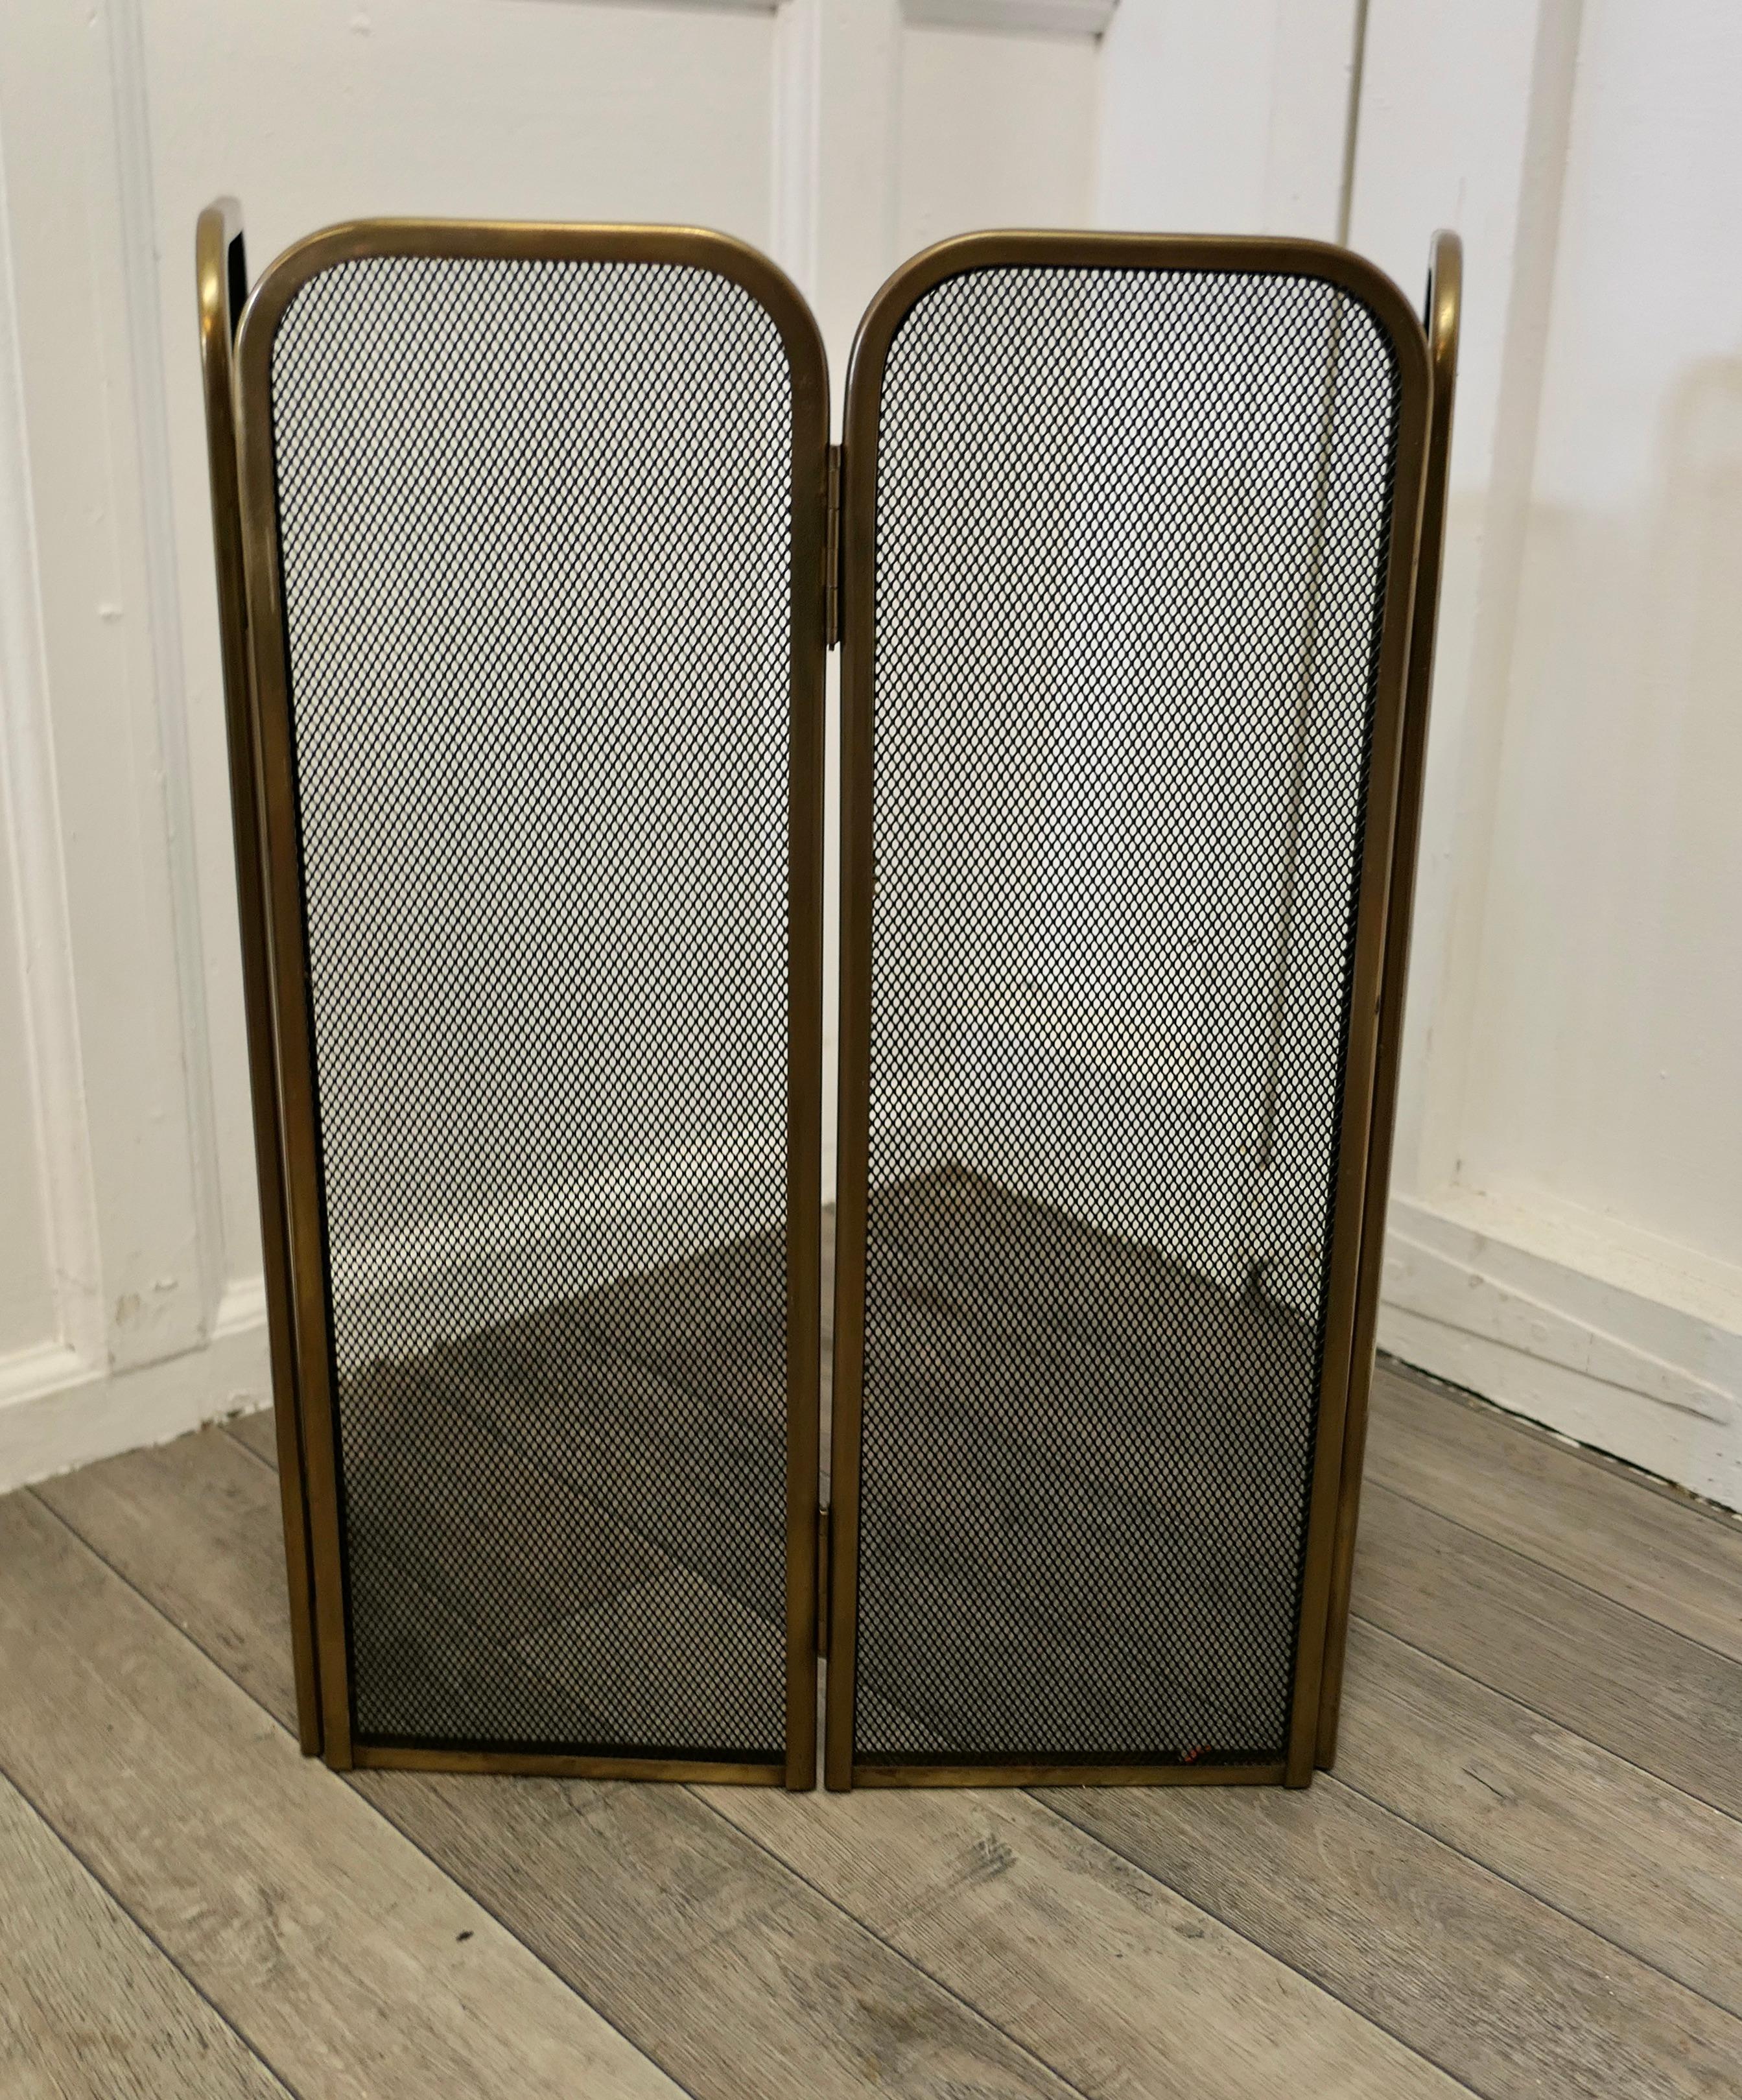 4 fold brass fire guard screen

This very useful spark guard has a brass frame and a fine mesh infill, it has the added advantage that it folds flat for storage, and when opened out it can be shaped to enclose your fire, very useful for a wood